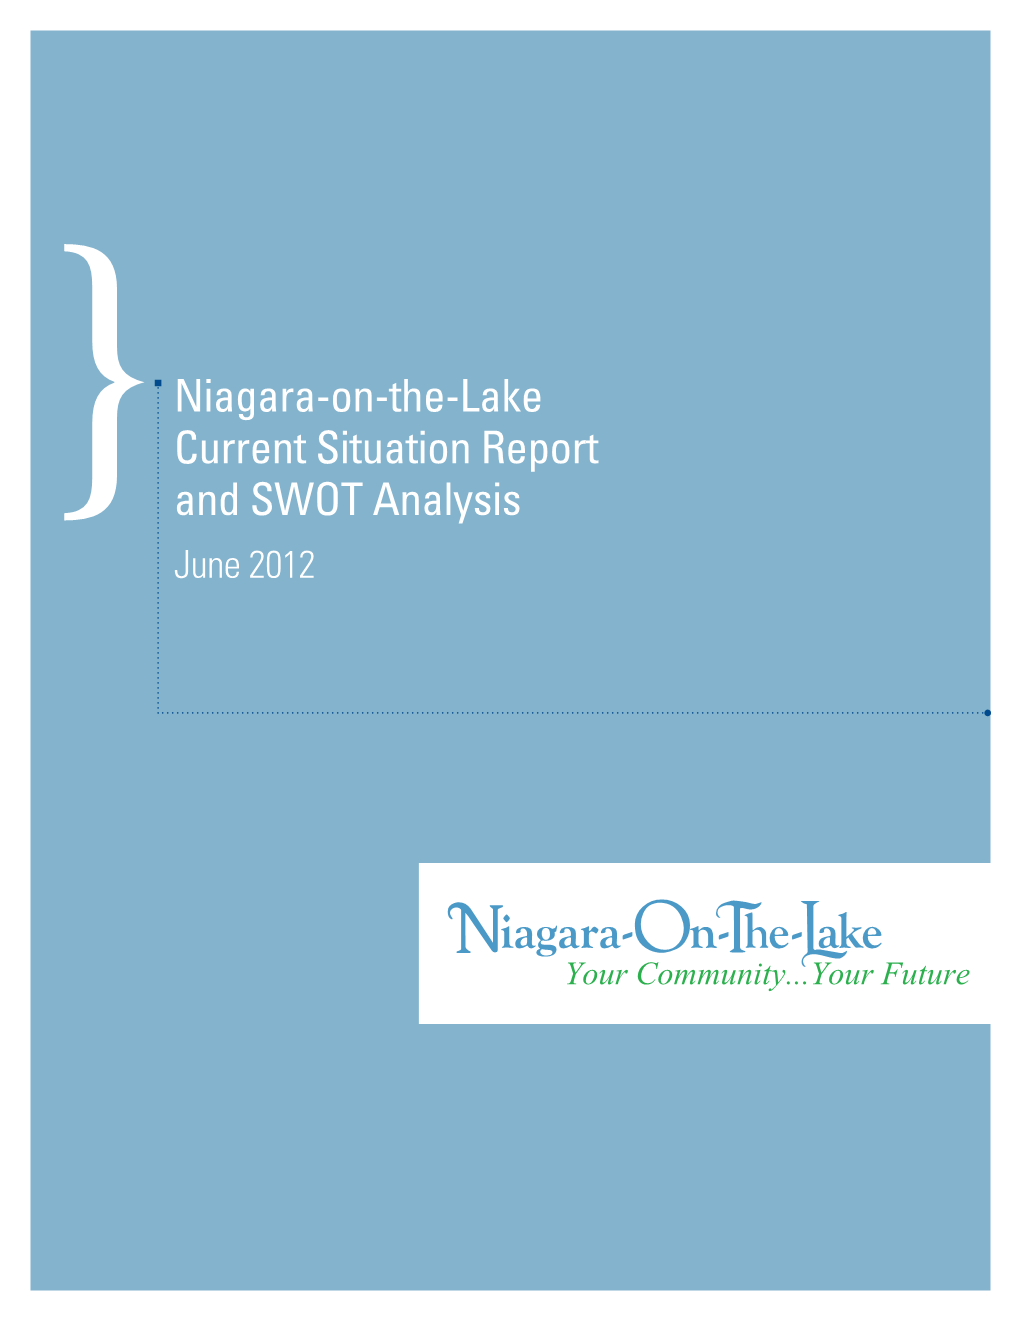 Niagara-On-The-Lake Current Situation Report and SWOT Analysis June 2012